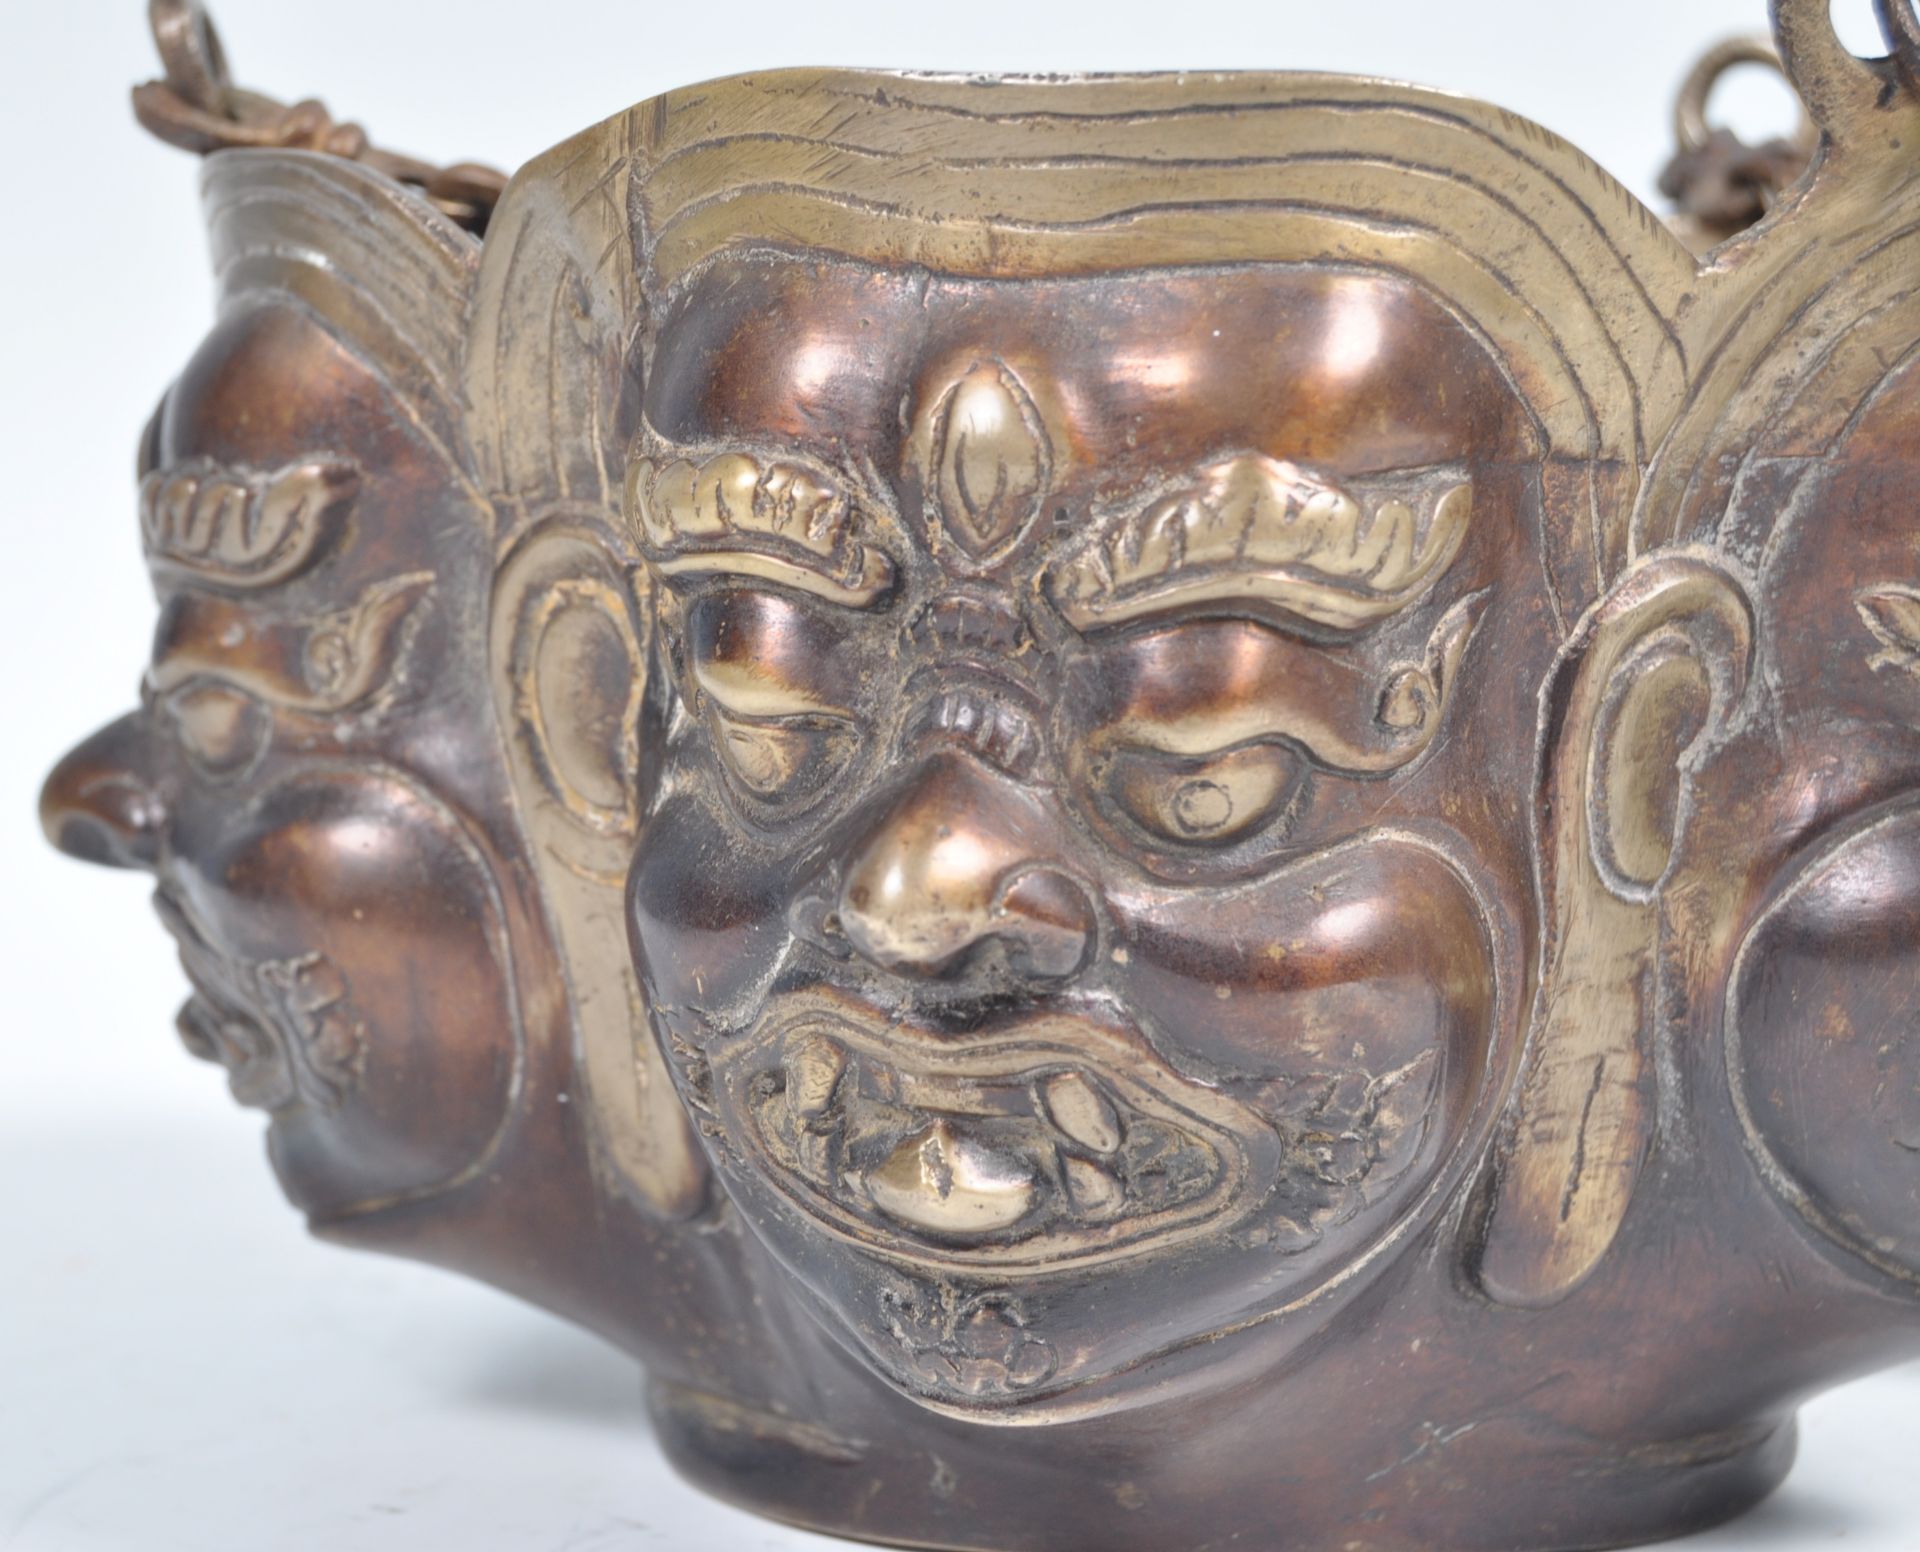 EARLY 20TH CENTURY INDONESIAN HINDU ANCIENT DEITY INCENSE BURNER - Image 3 of 6